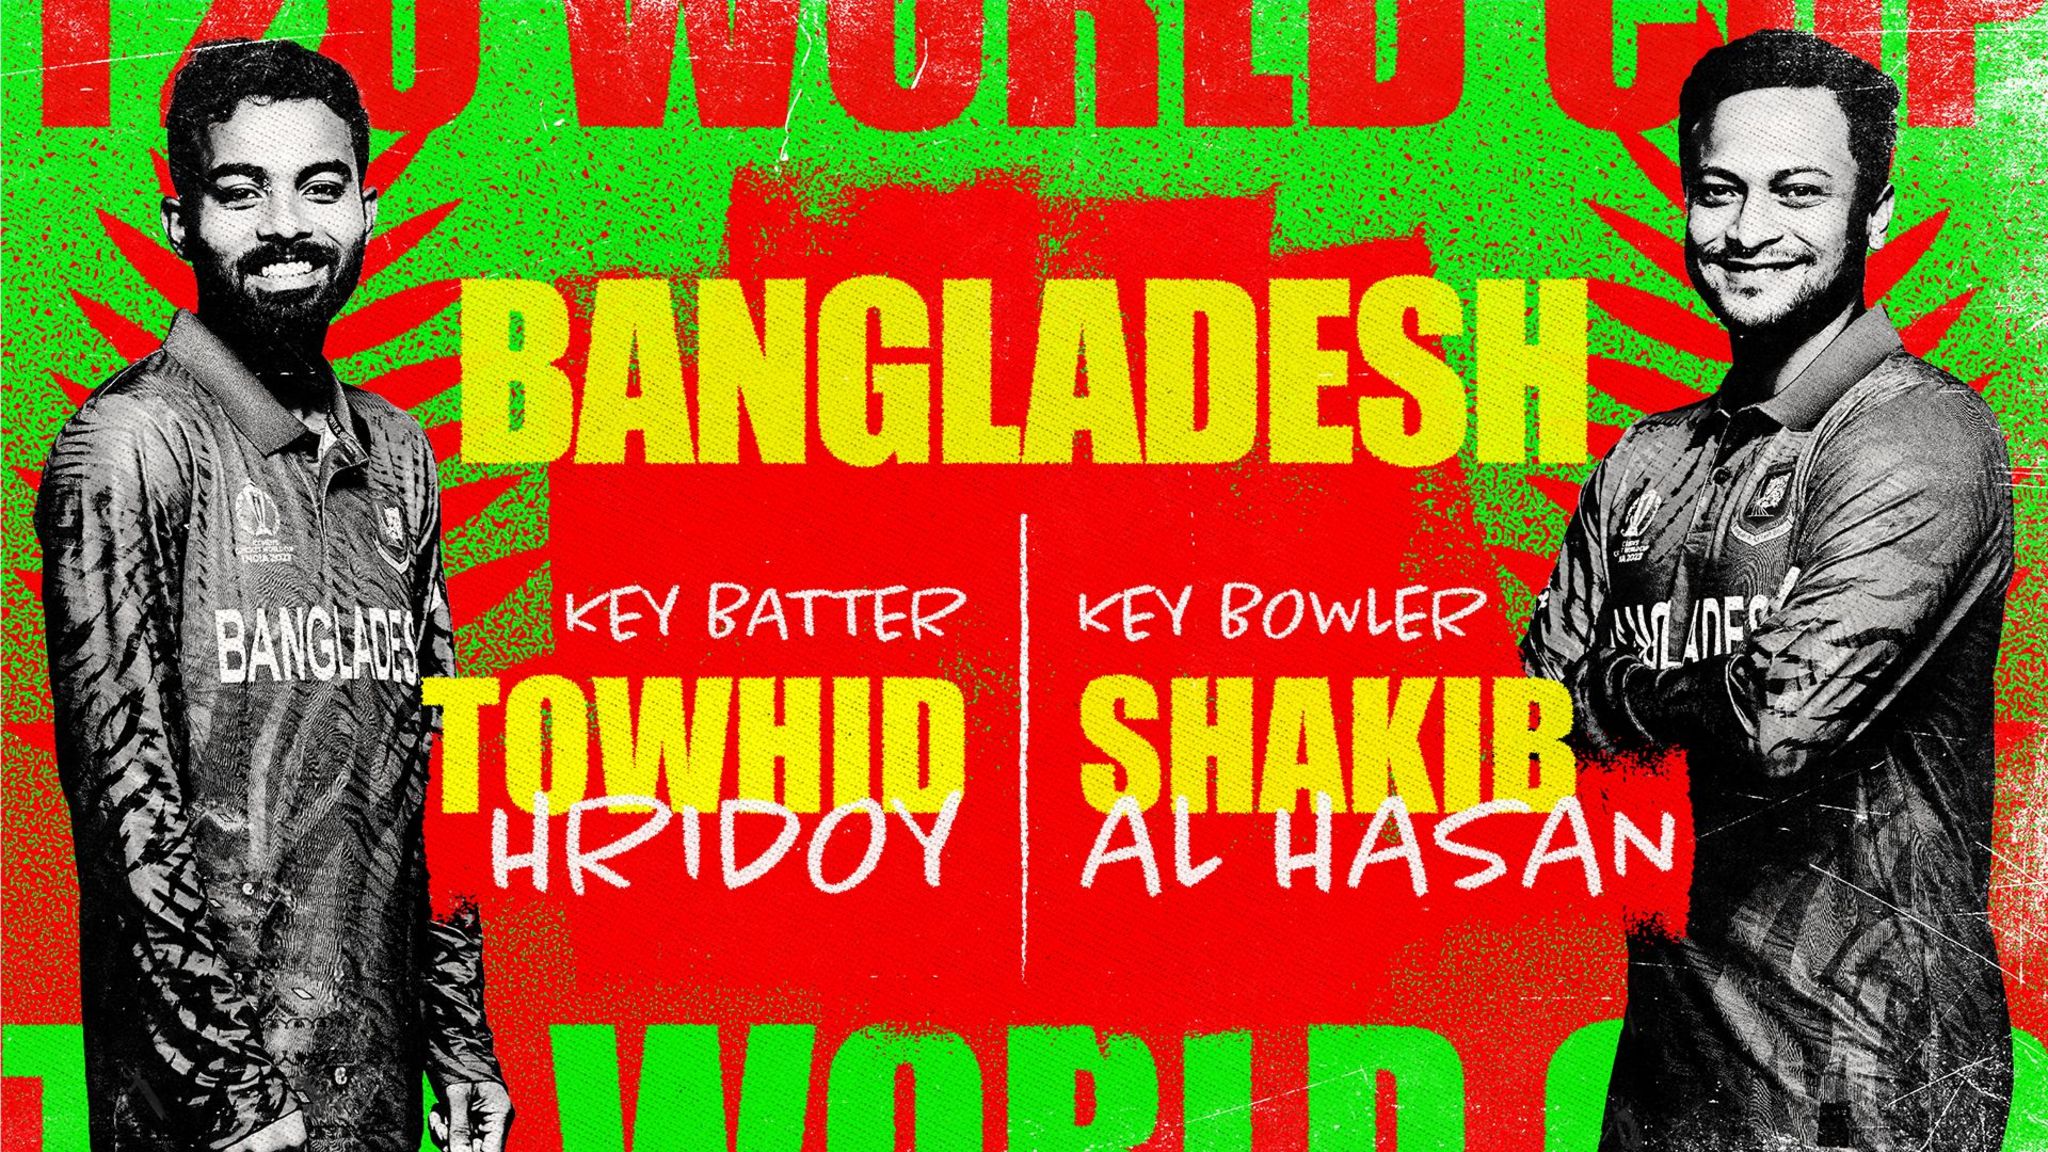 A graphic showing Towhid Hridoy and Shakib Al Hasan as Bangladesh's key batter and bowler at the Men's T20 World Cup